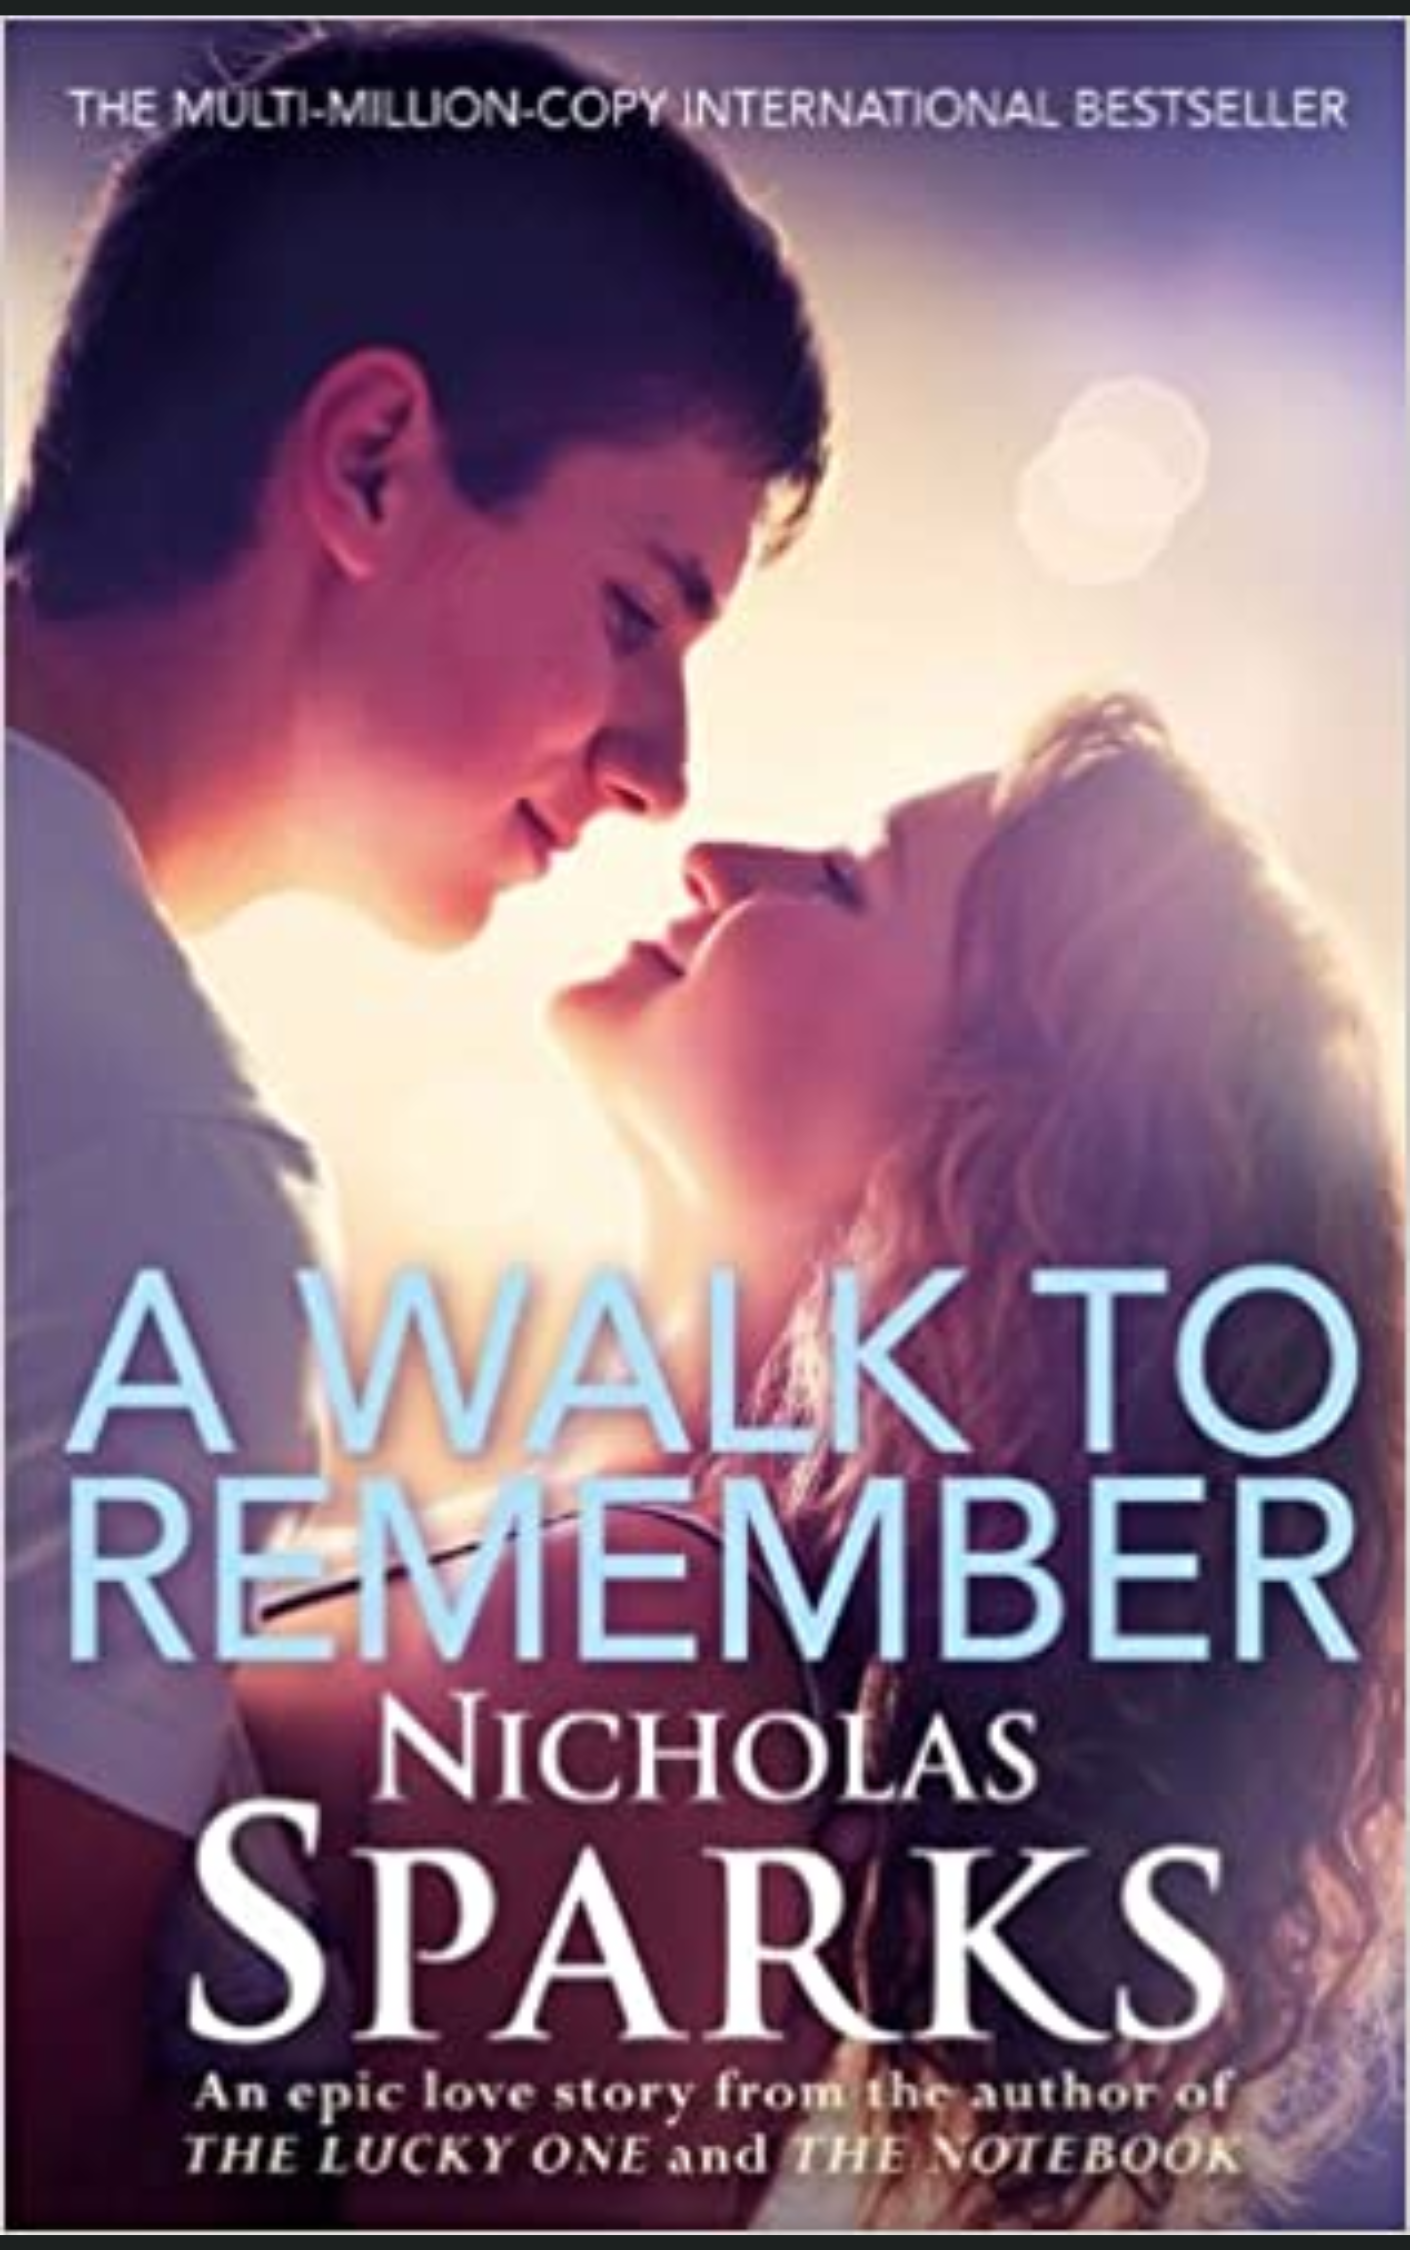 A WALK TO REMEMBER by NICHOLAS SPARKS